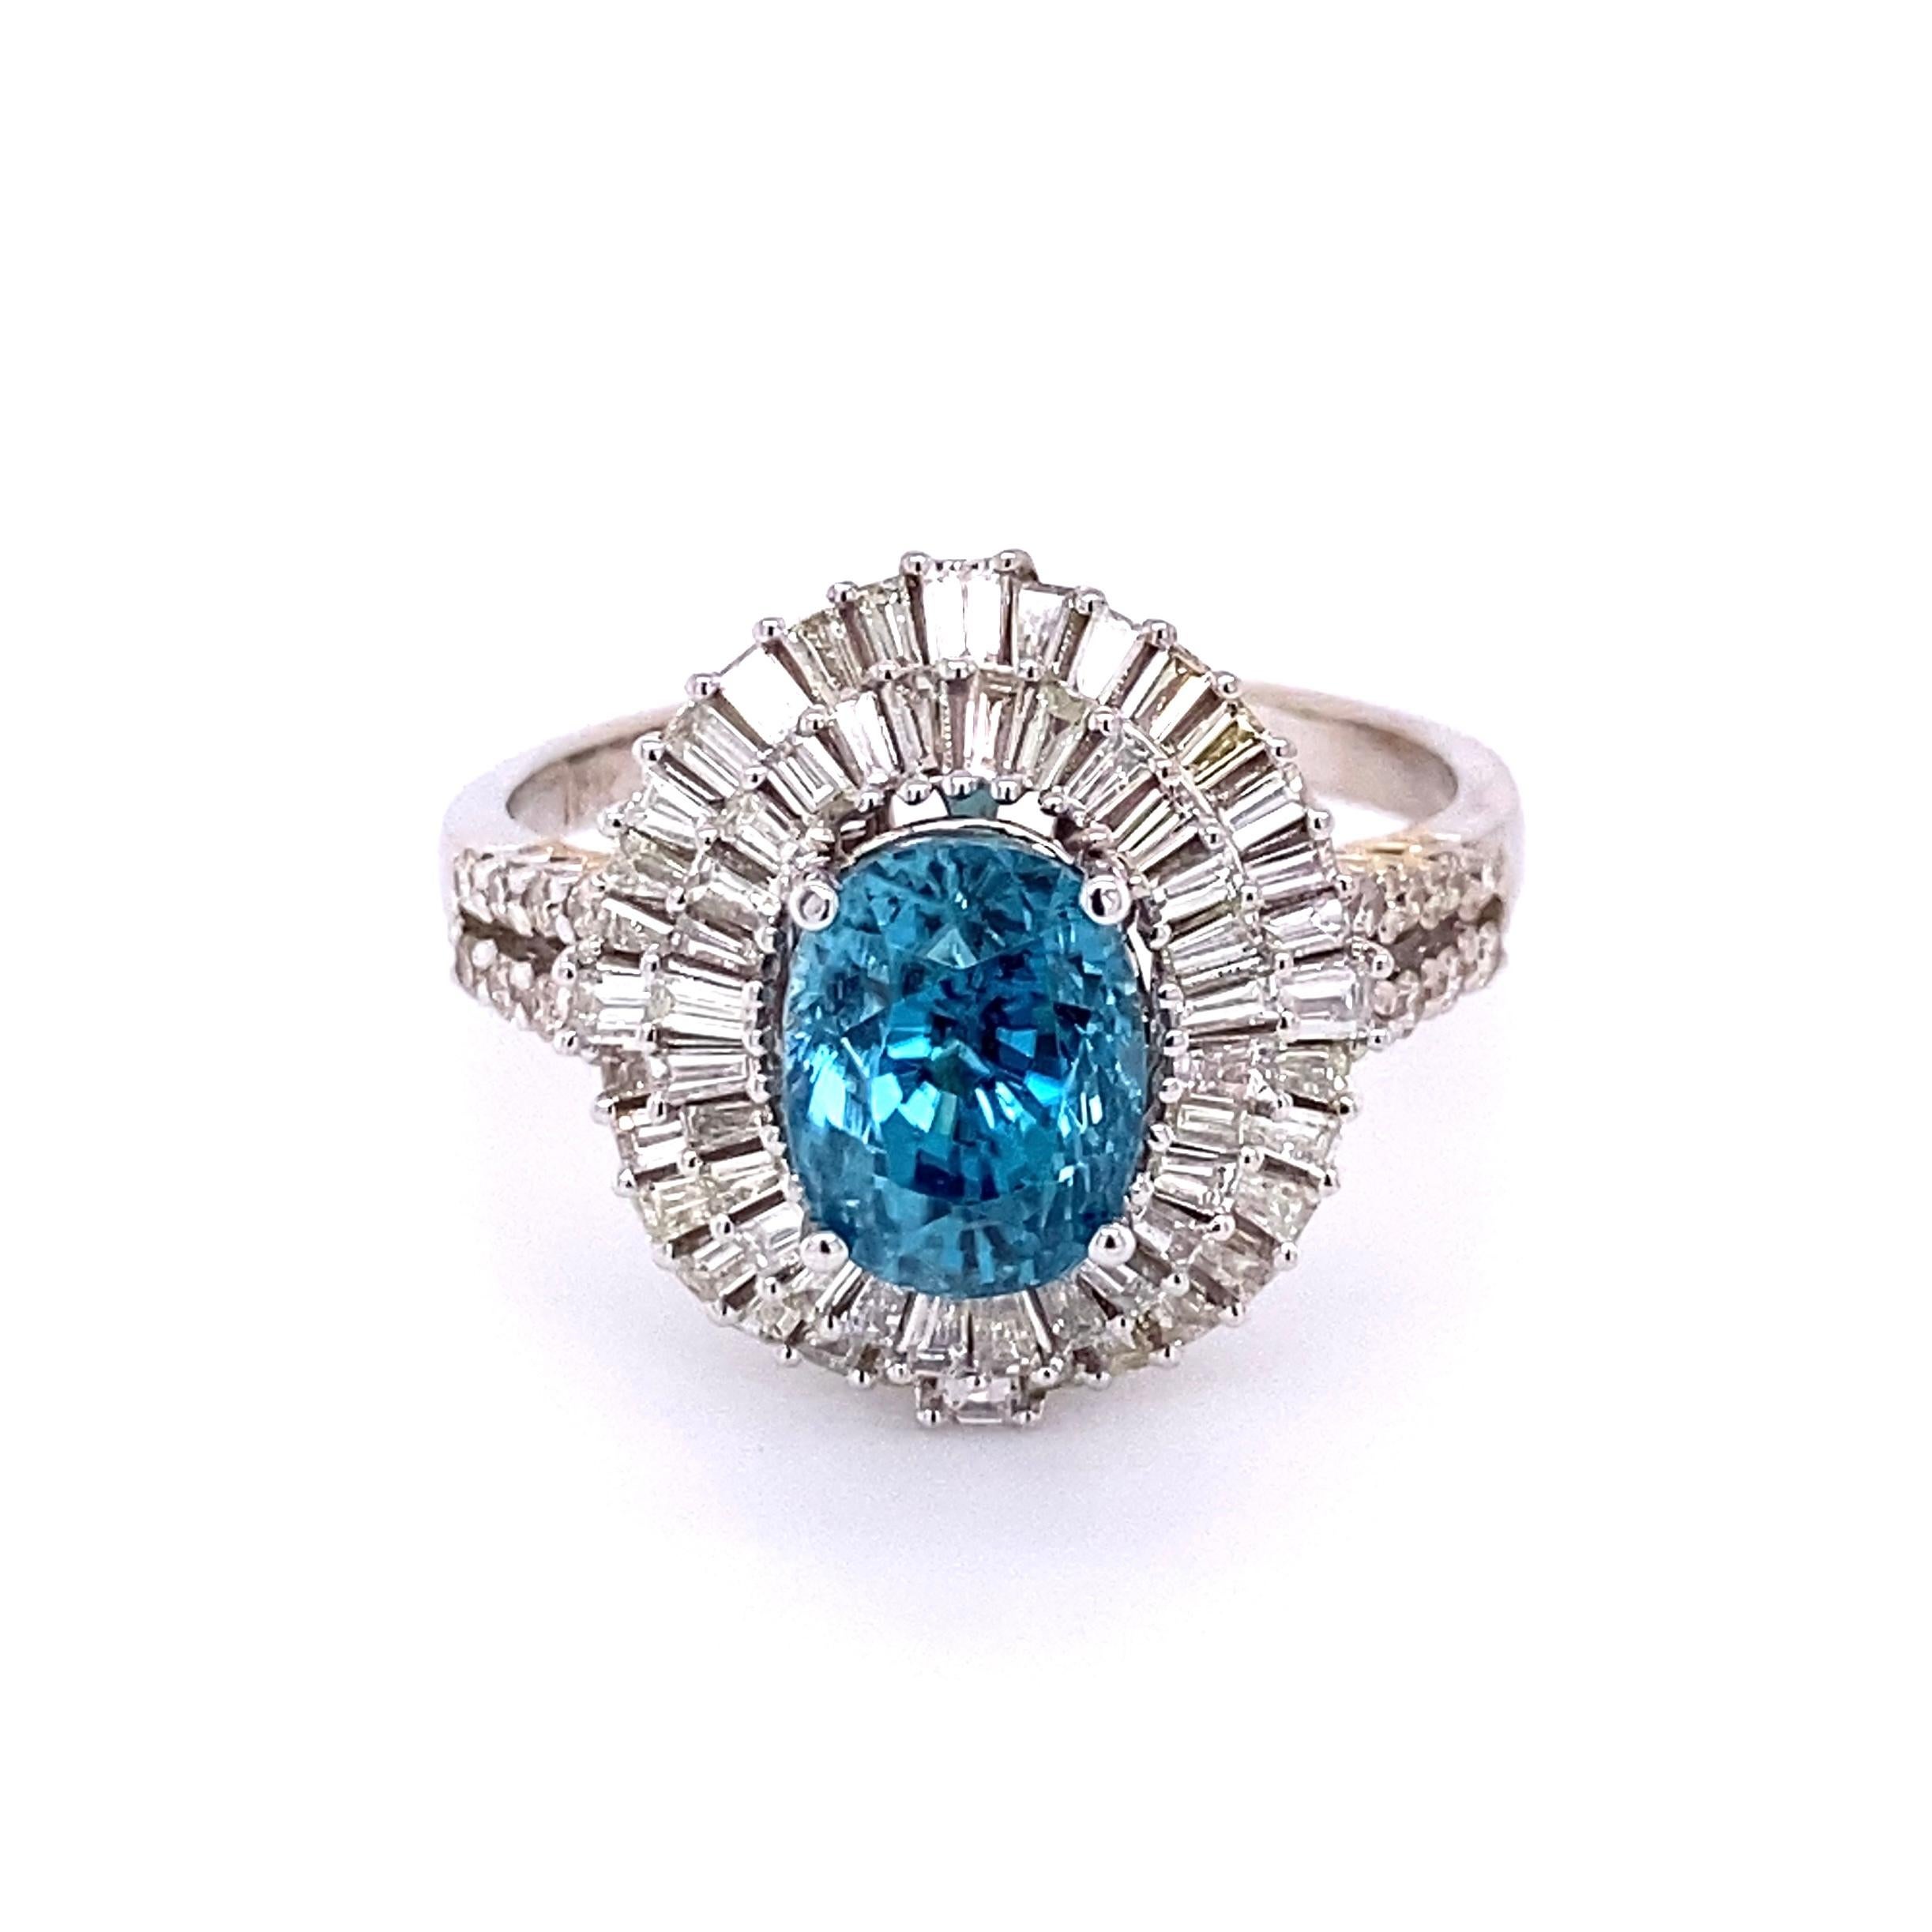 Women's 5.24 Carat Blue Zircon and Diamond Gold Cocktail Ring Estate Fine Jewelry For Sale